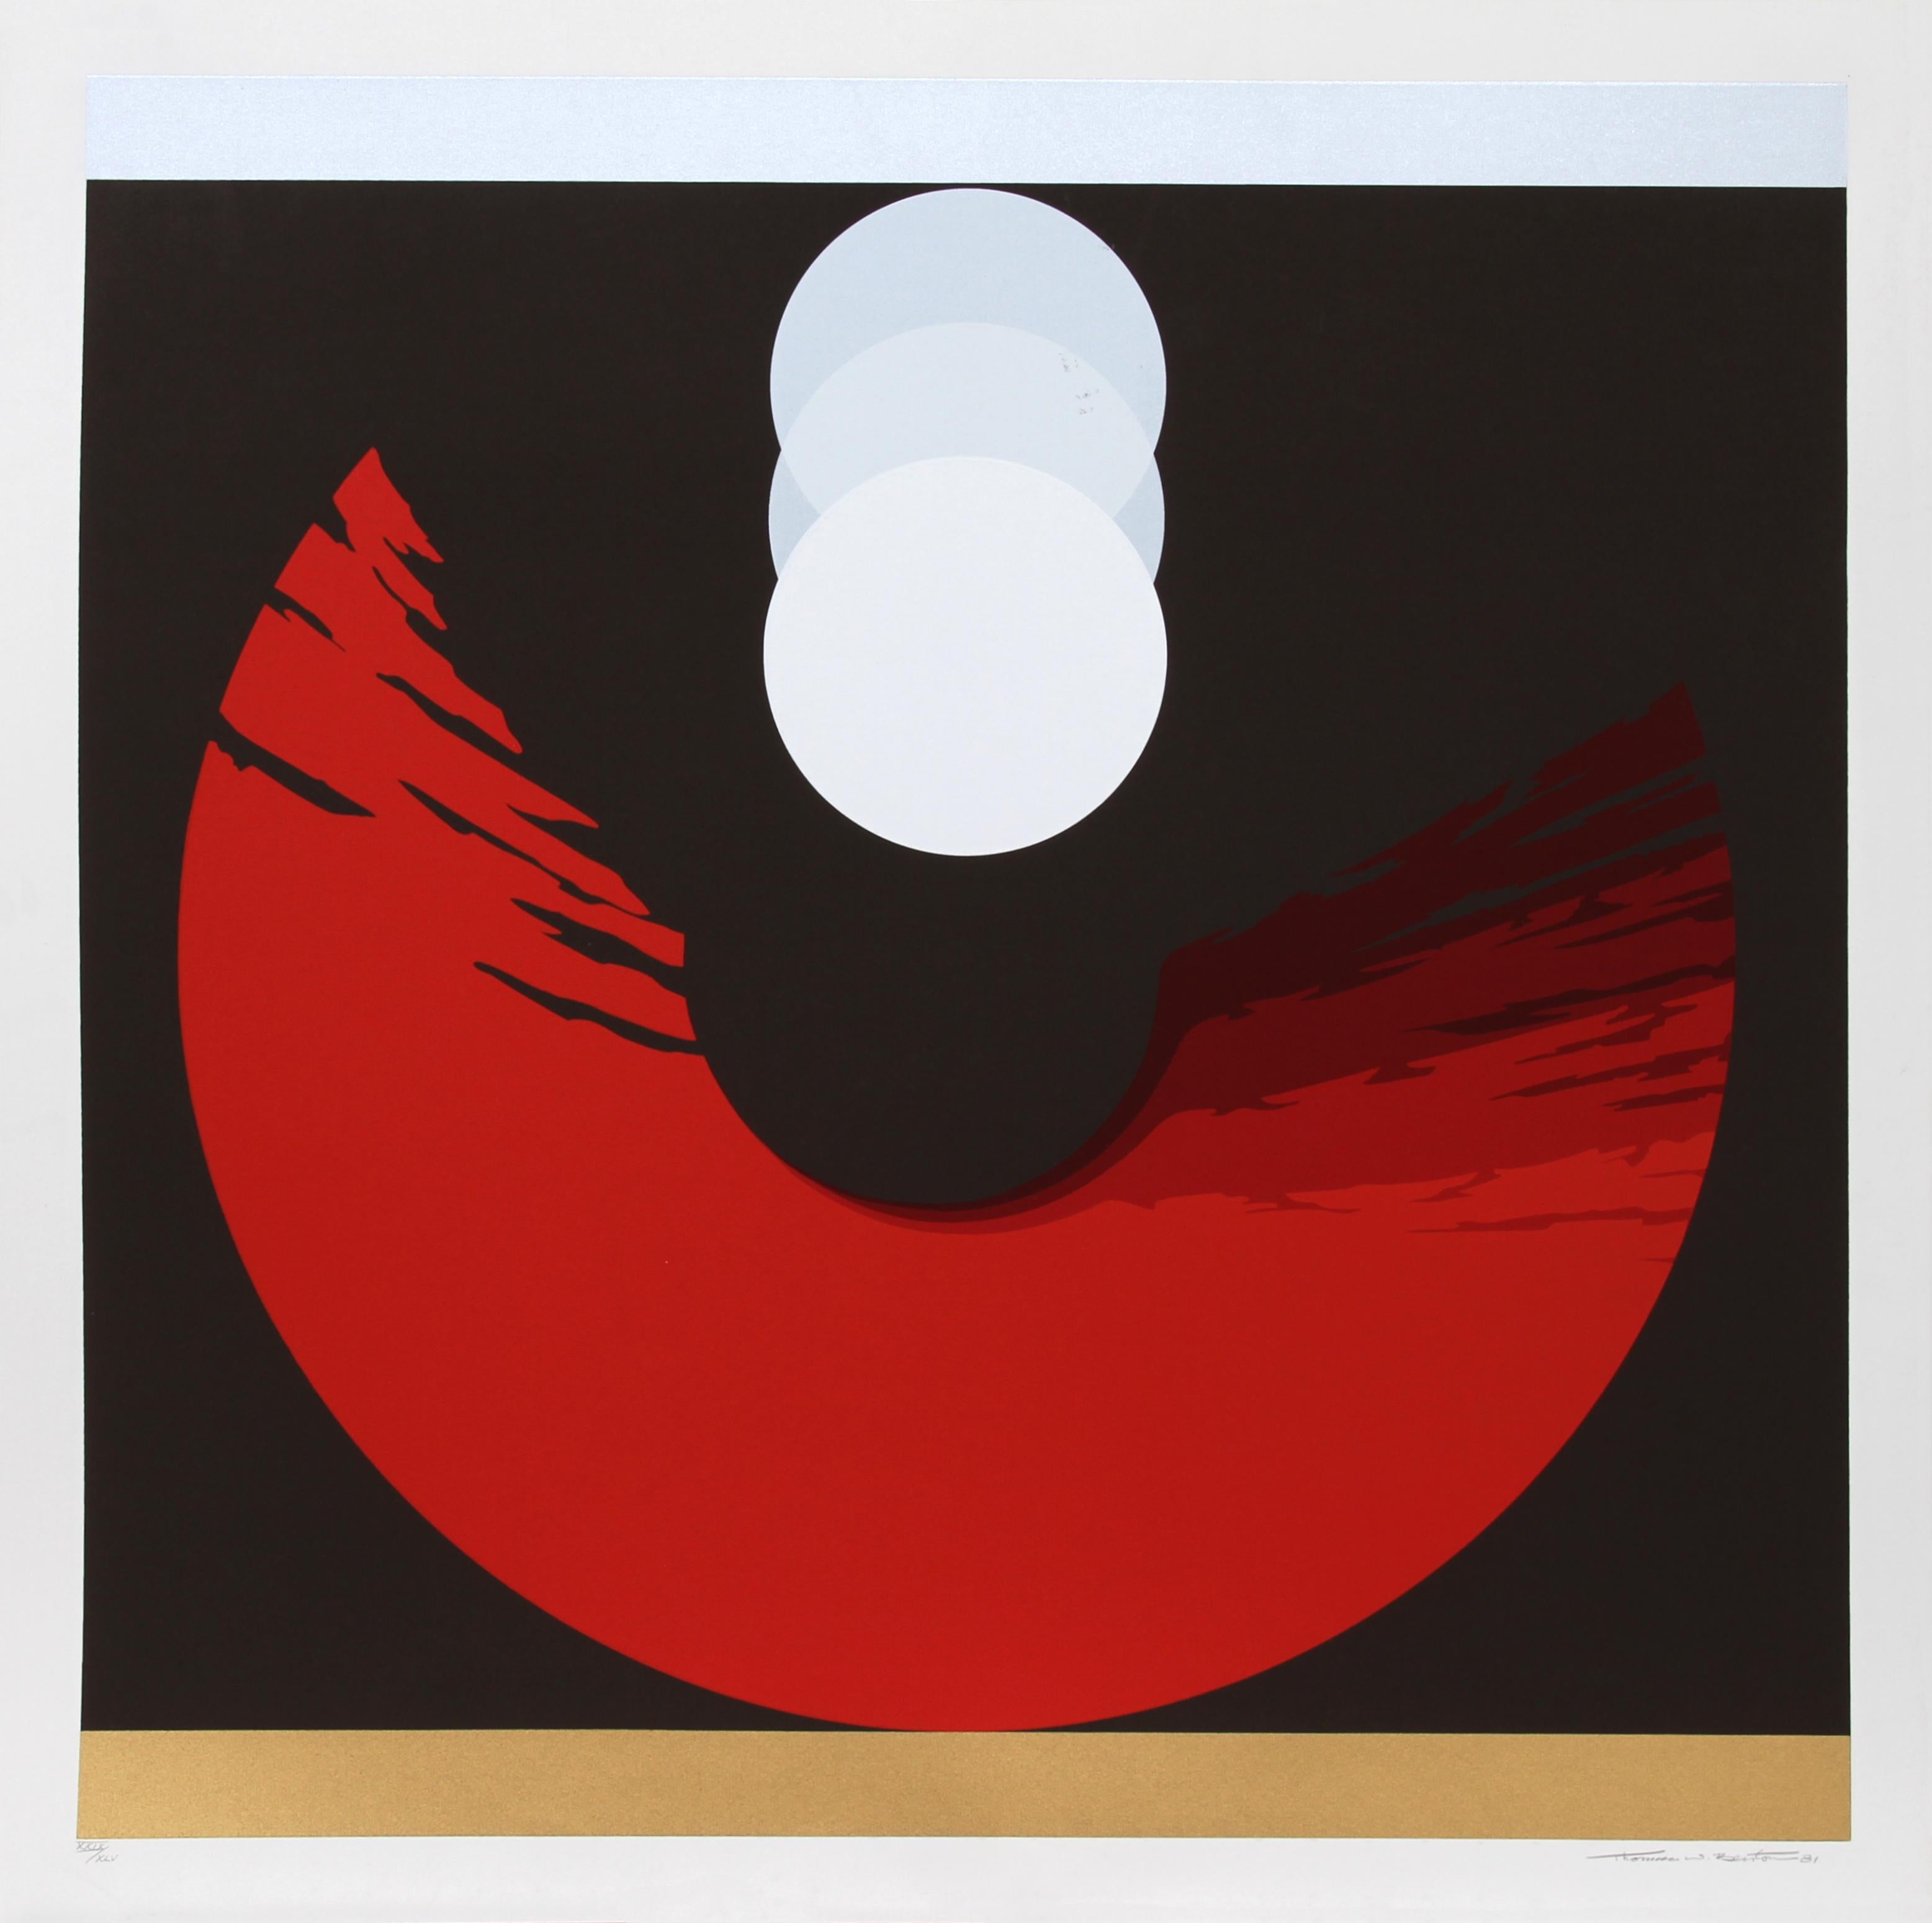 From the Evolution Series by Thomas Benton, this bold red screenprint resembles an eye with the iris descending down into it. Benton drew upon his career as an architect, the strong influence of Eastern art, and artists such as Mark Rothko and